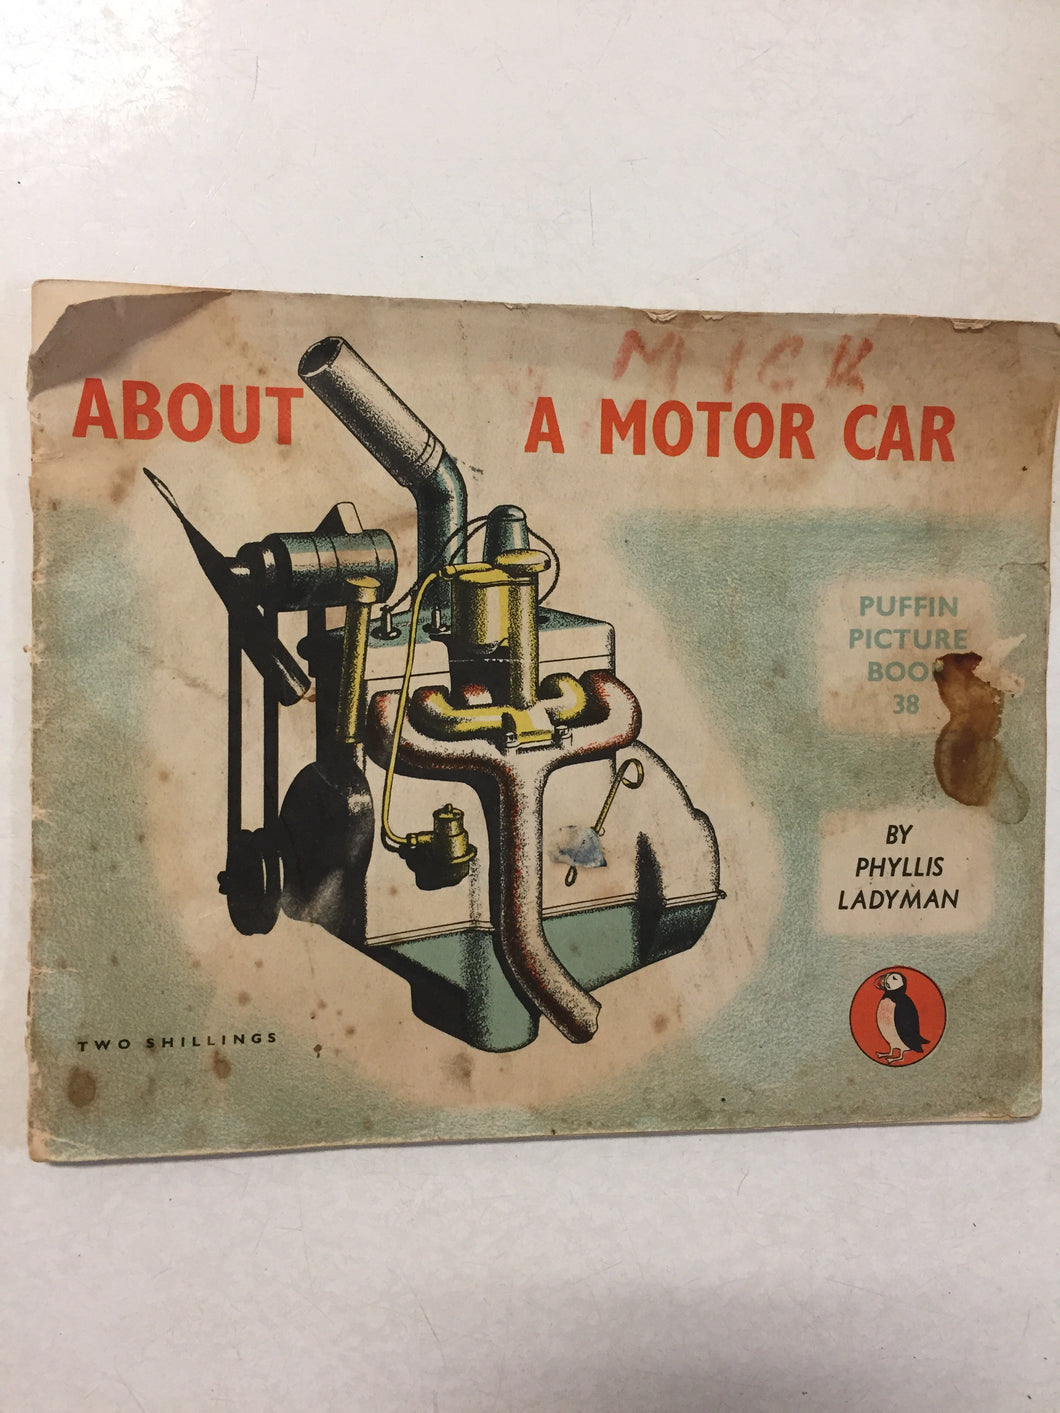 About a Motor Car